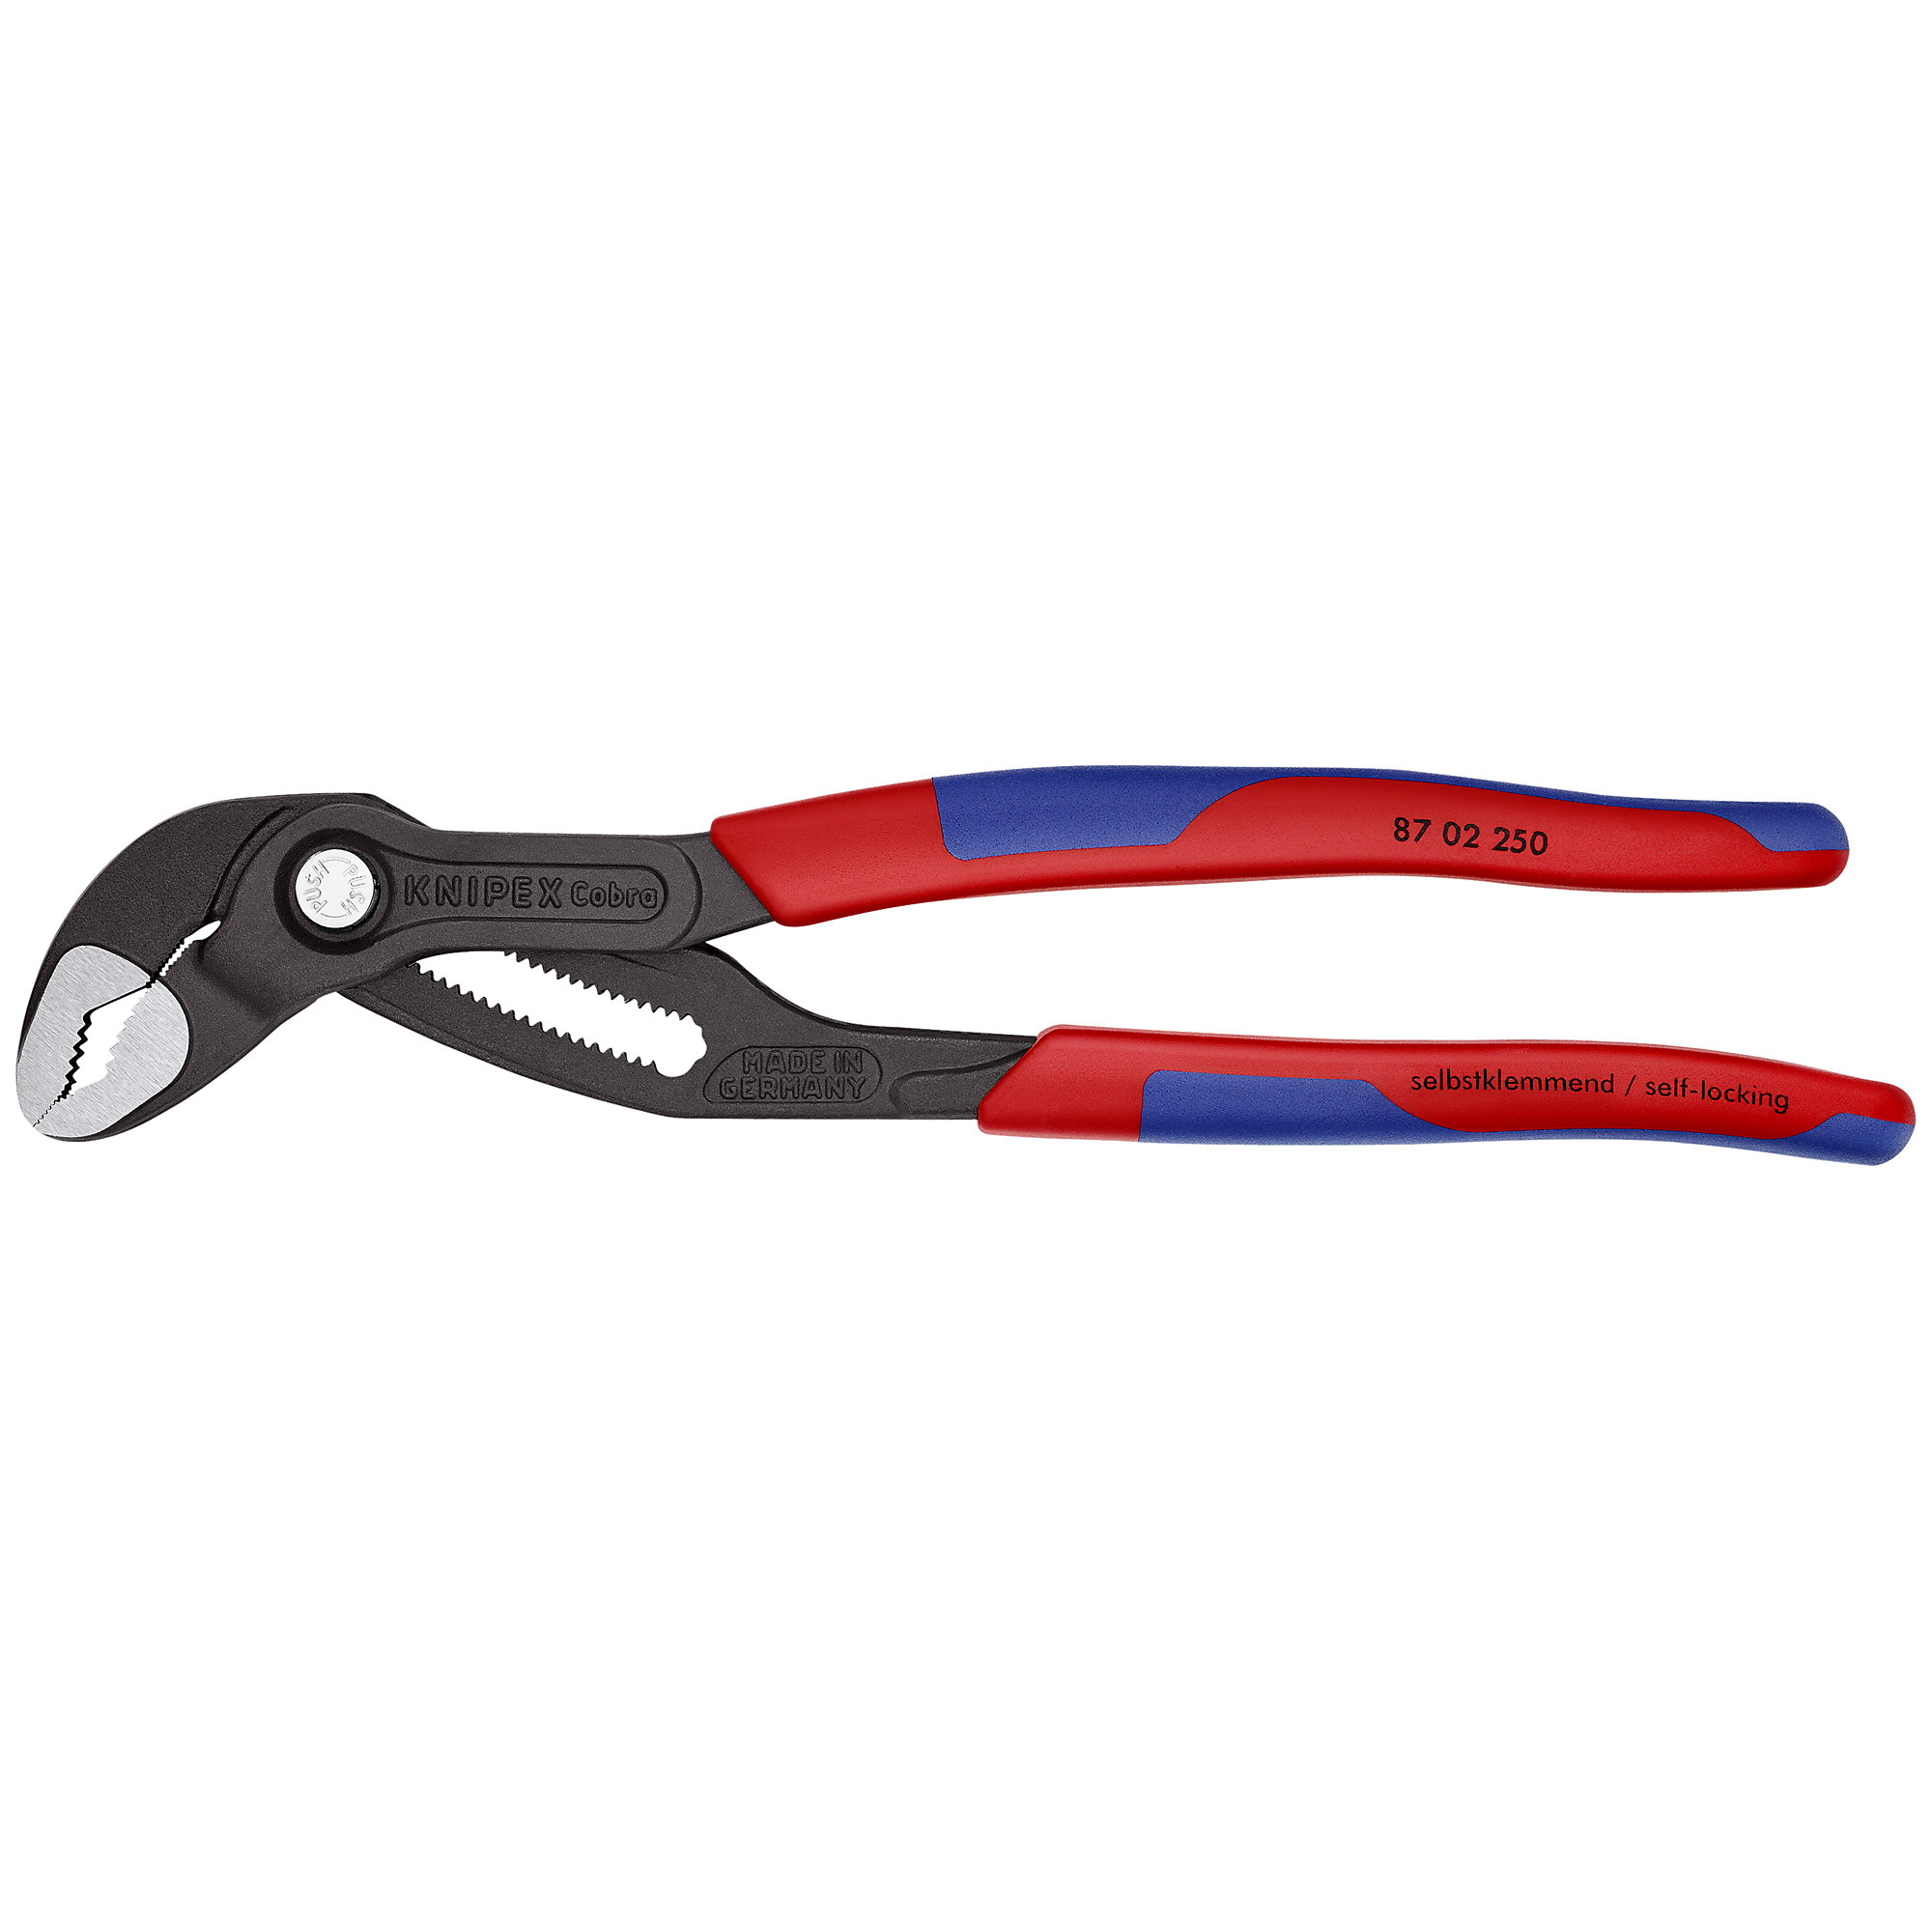 KNIPEX Cobra , Cobra Water Pump Pliers, Comfort grip, Bulk, 10Inch, Pieces (qty.) 1 Material Steel, Jaw Capacity 2 in, Model 87 02 250